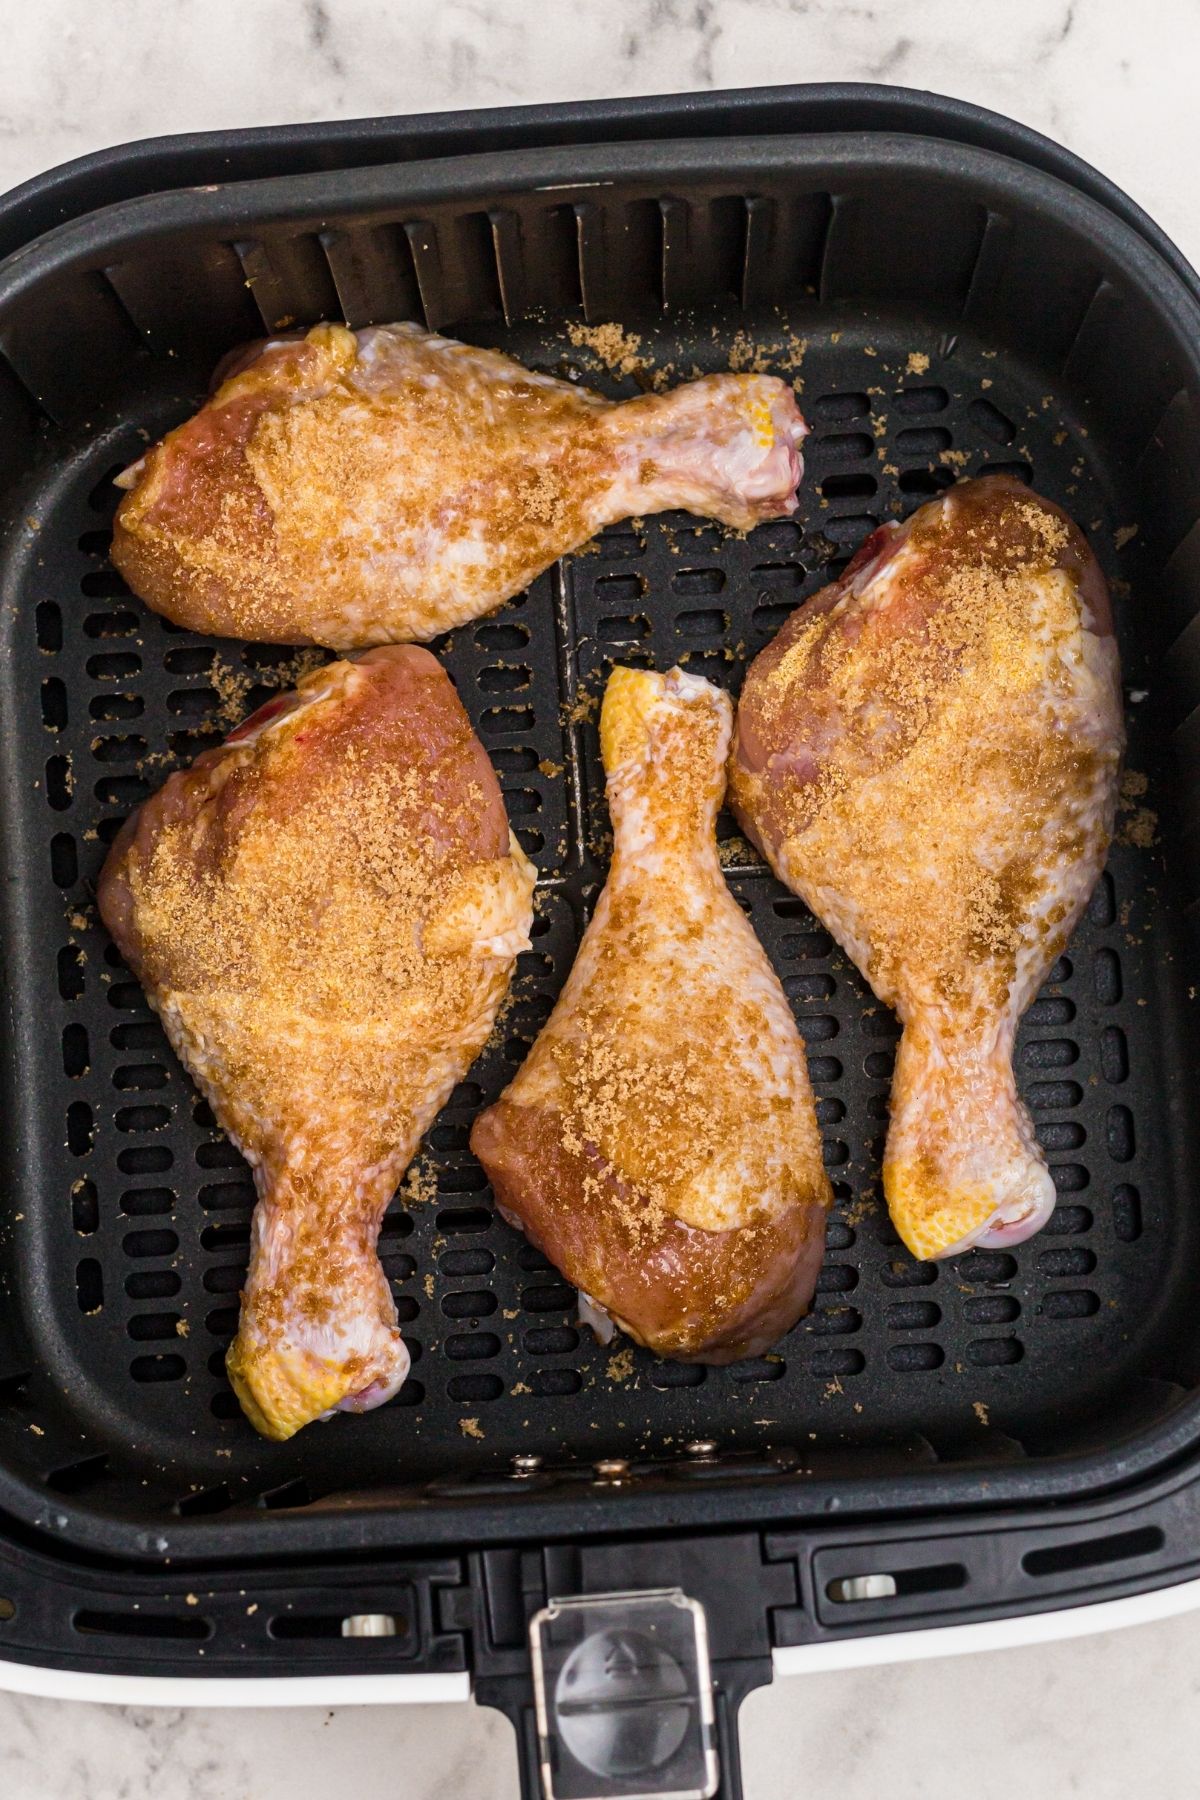 Coated chicken with seasonings in the air fryer basket before being cooked